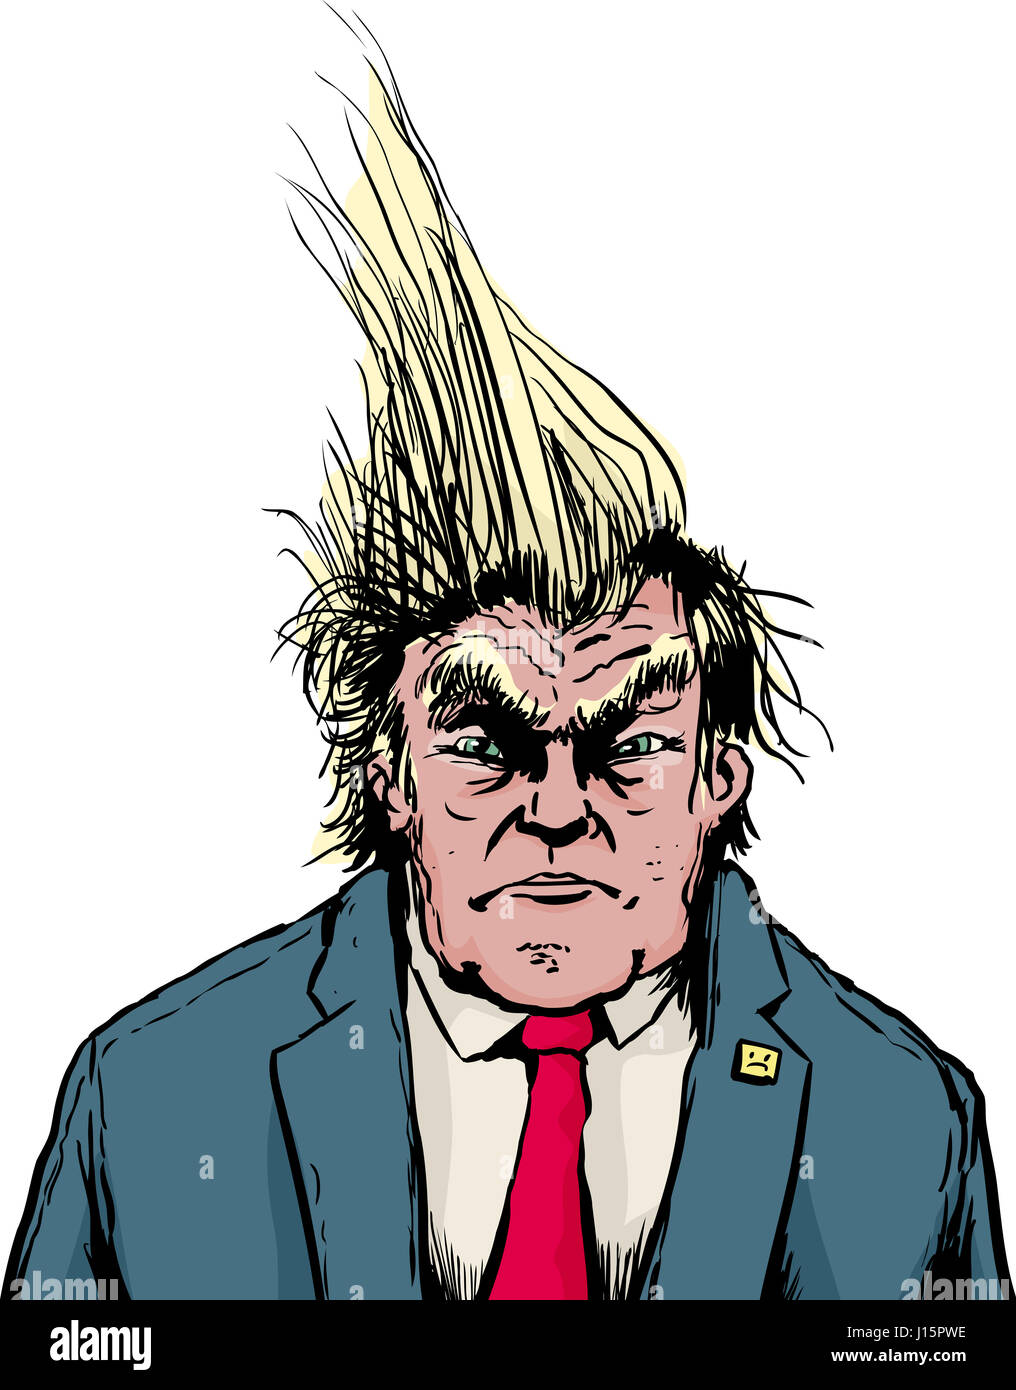 April 18, 2017. Caricature of frowning Donald Trump with spiked hair Stock Photo